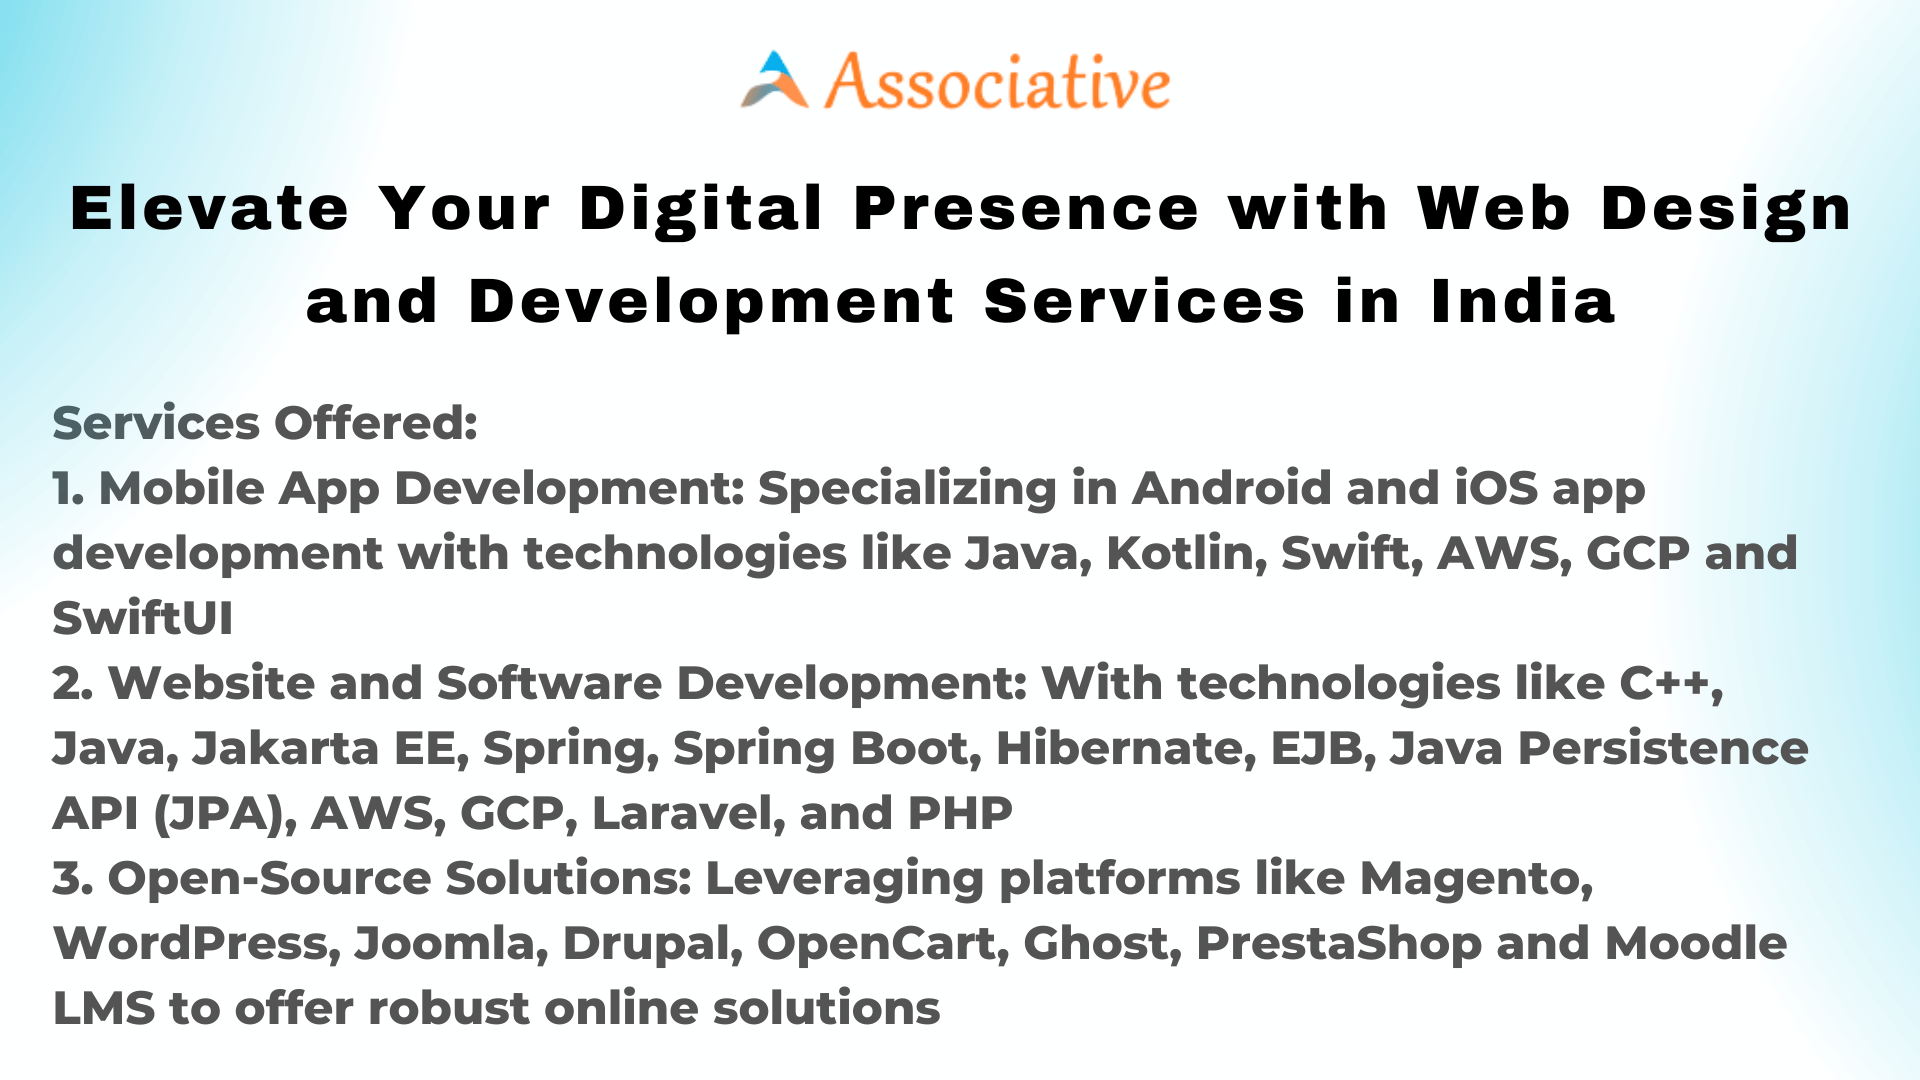 Elevate Your Digital Presence with Web Design and Development Services in India